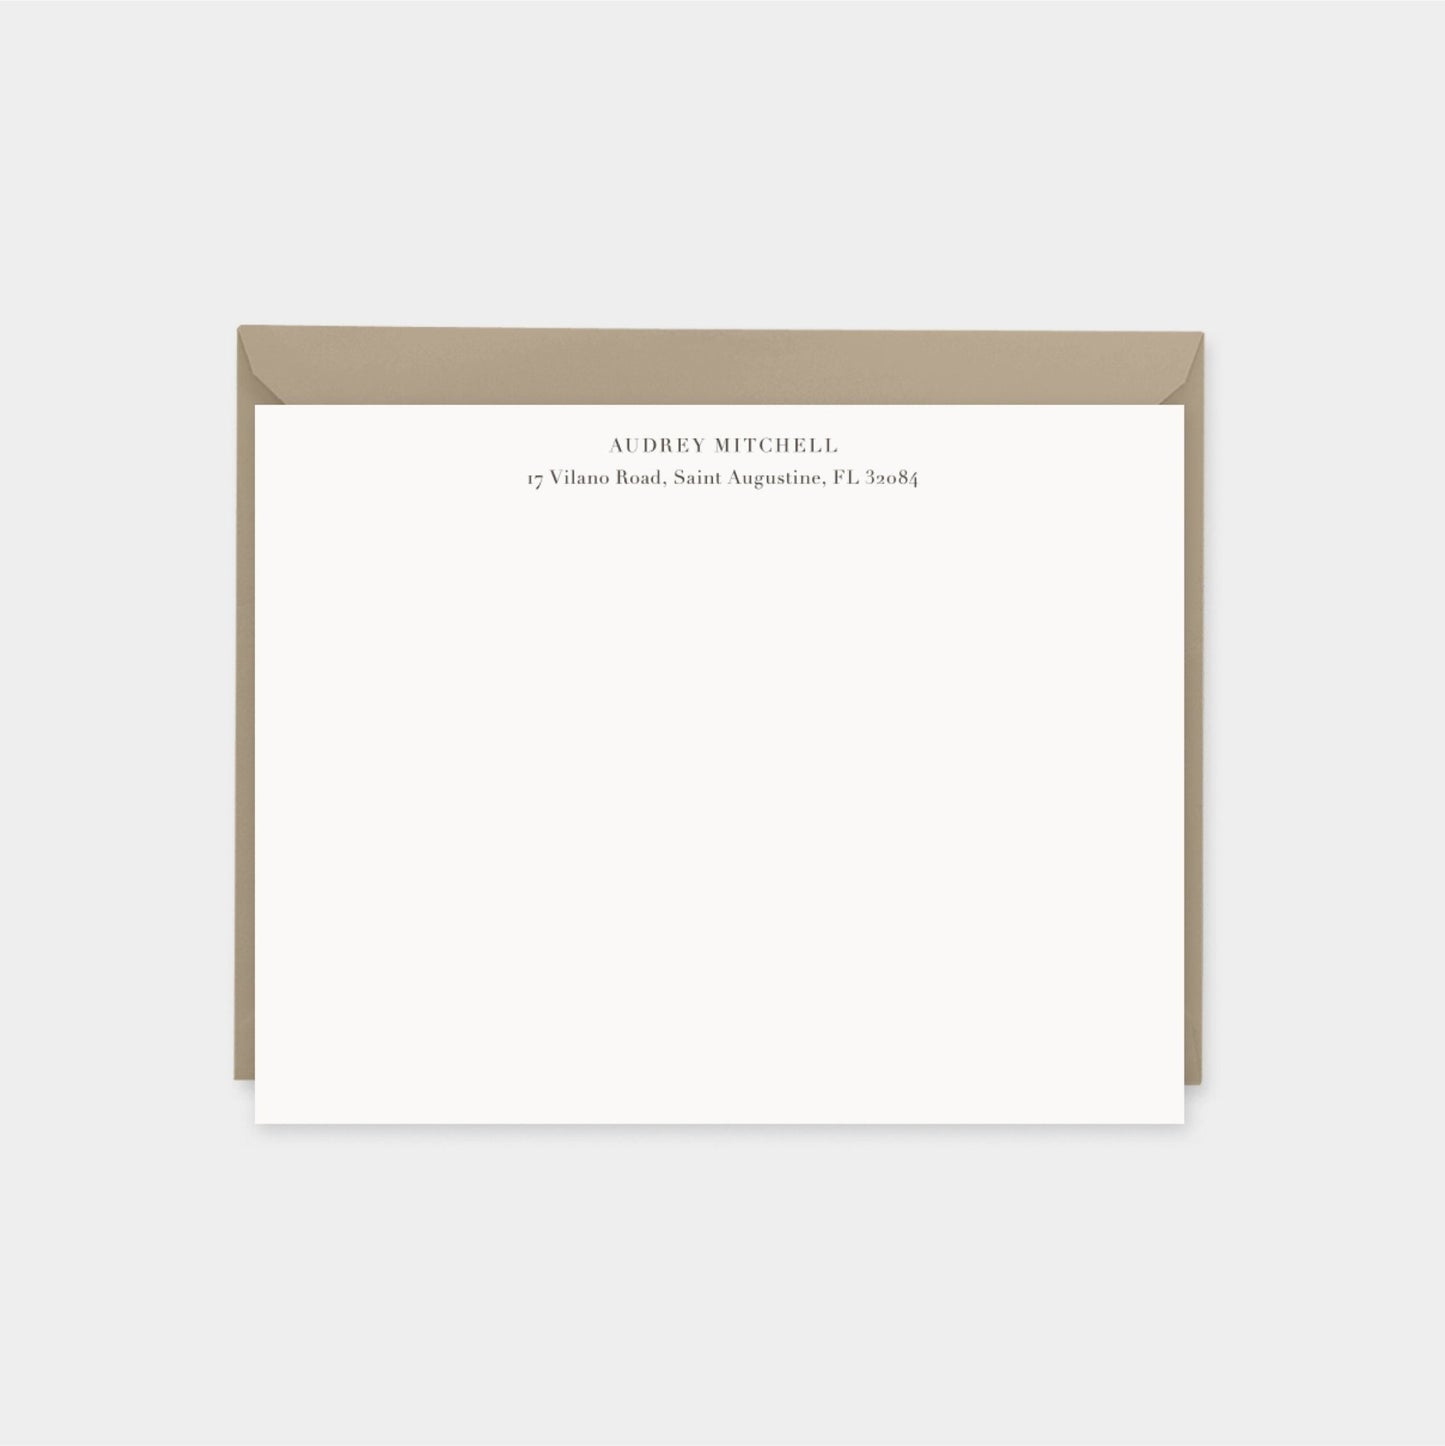 Gray and Mustard Ink Splot Texture Note Cards, Elegant Note The Design Craft